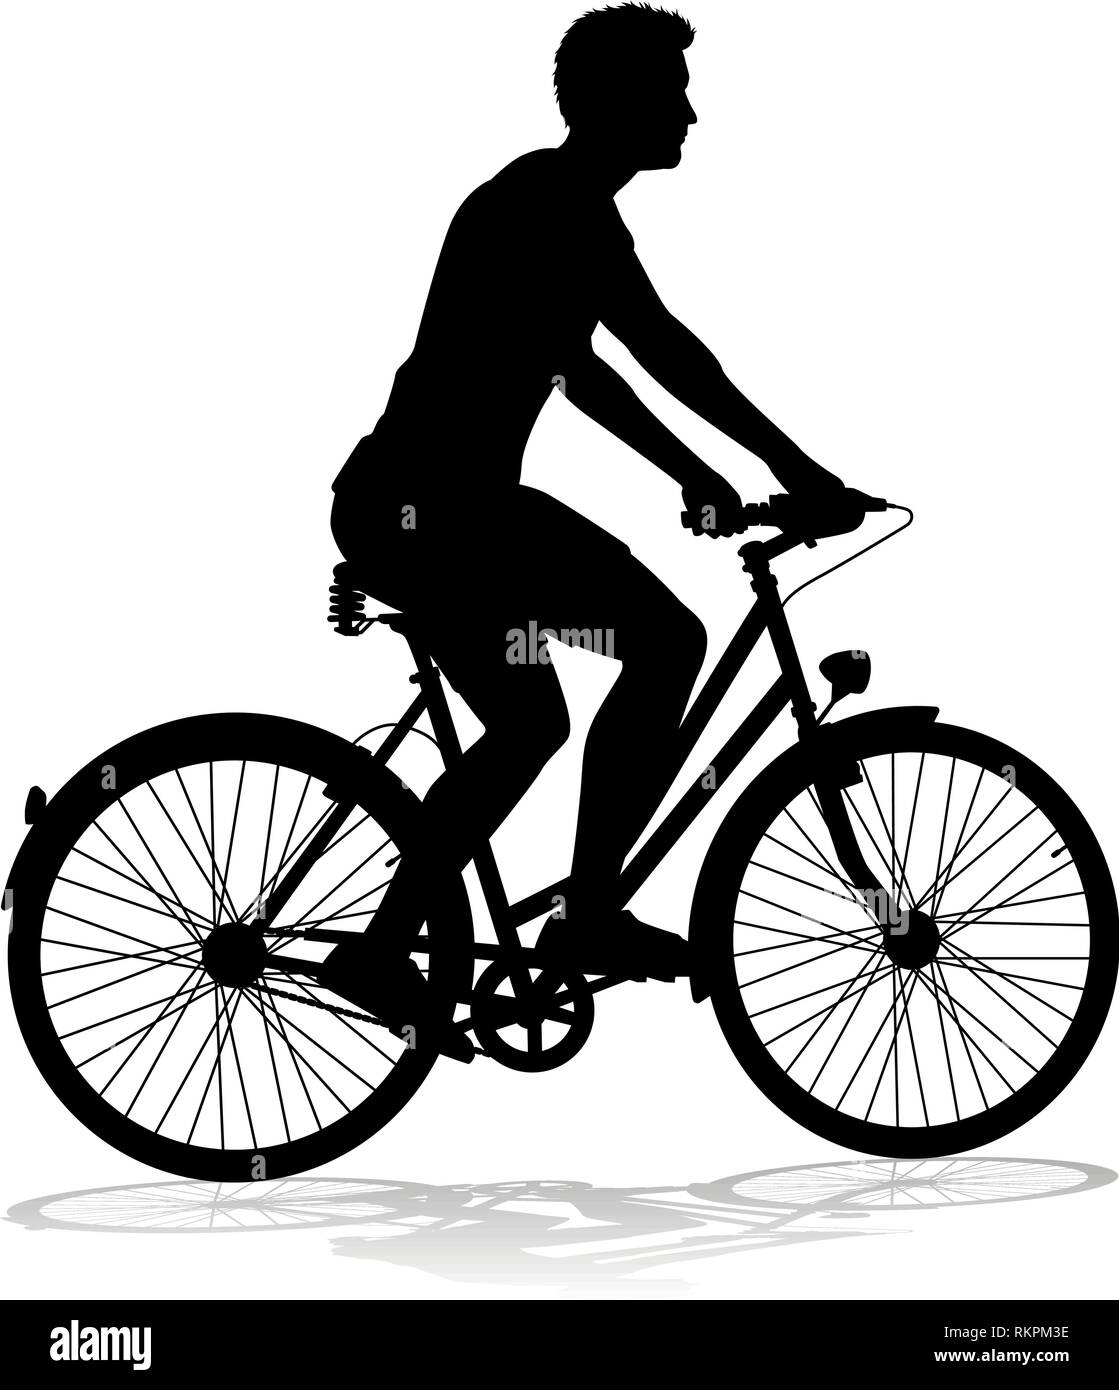 Bike Cyclist Riding Bicycle Silhouette Stock Vector